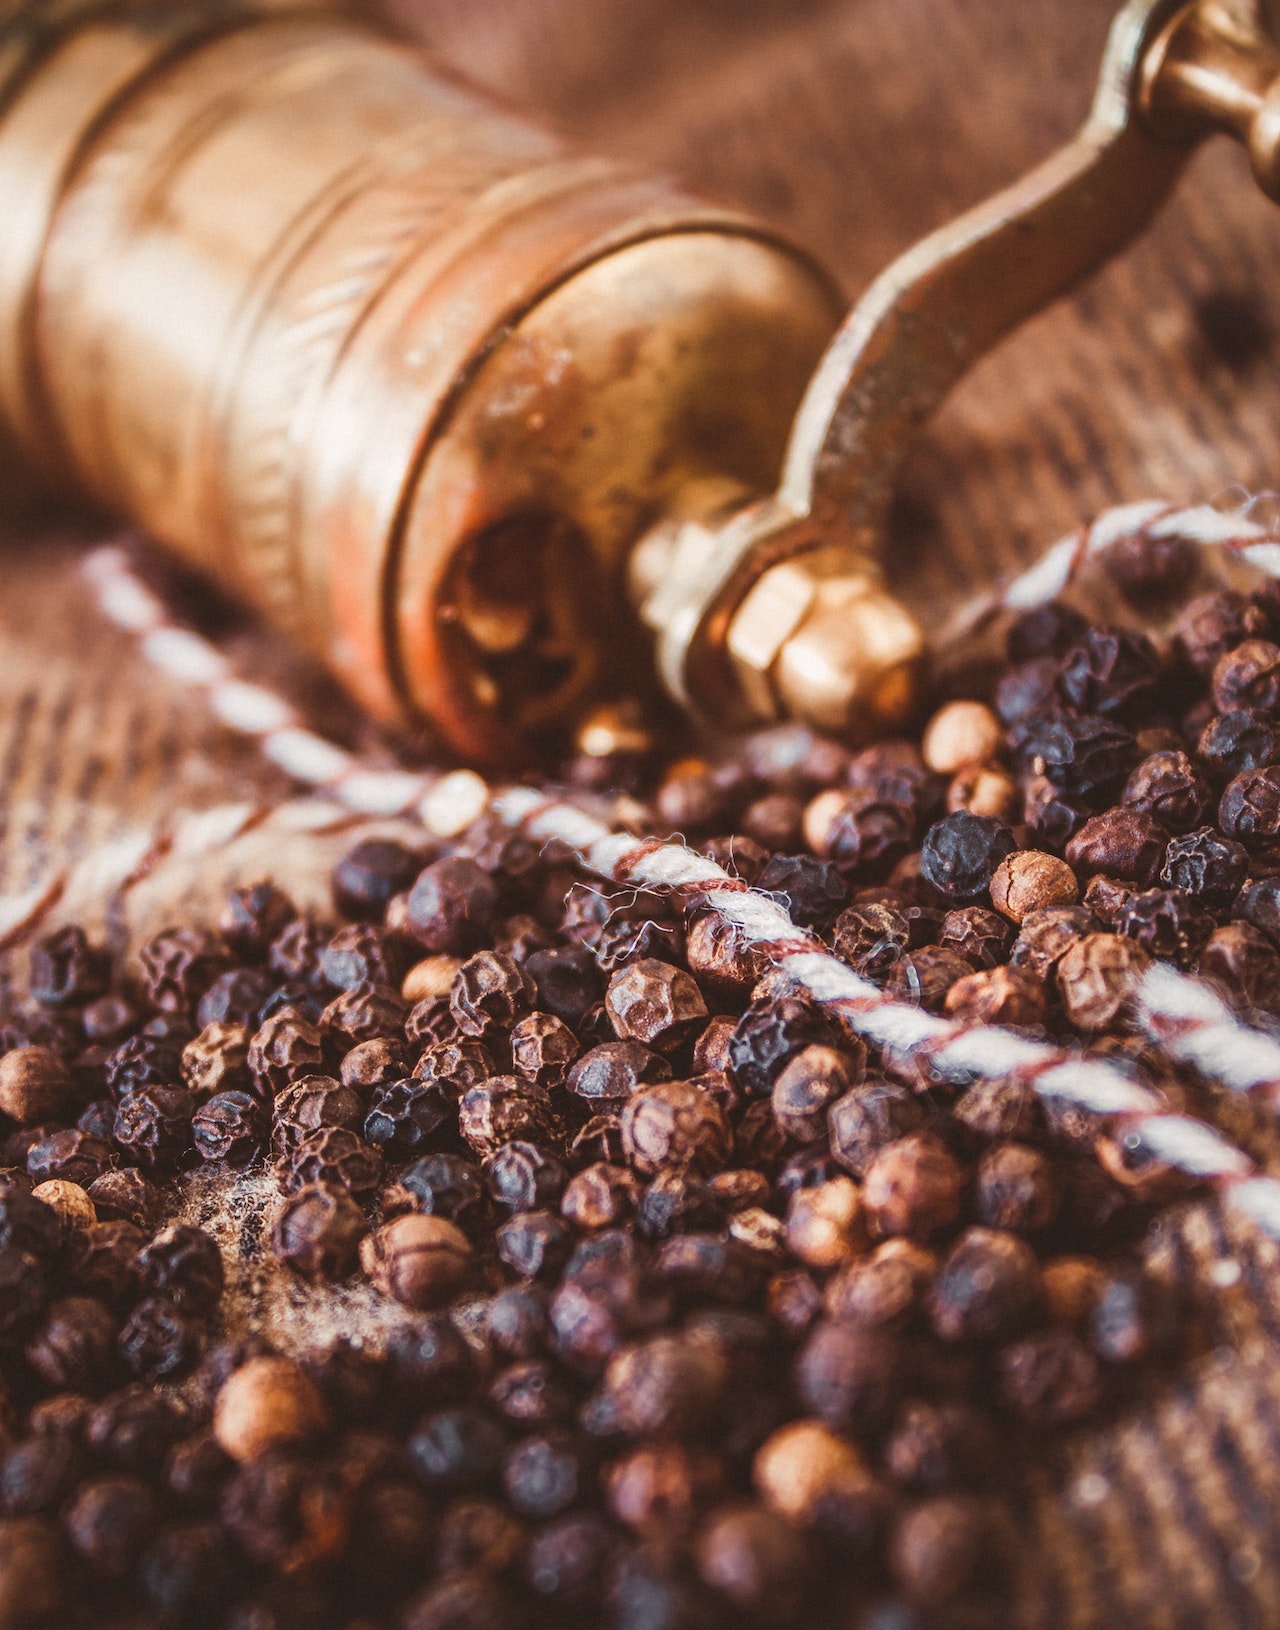 Black pepper is not just a popular spice, but it also offers a range of health benefits. This humble spice has been used for centuries in traditional medicine and is now gaining recognition in scientific studies for its numerous health-promoting properties.